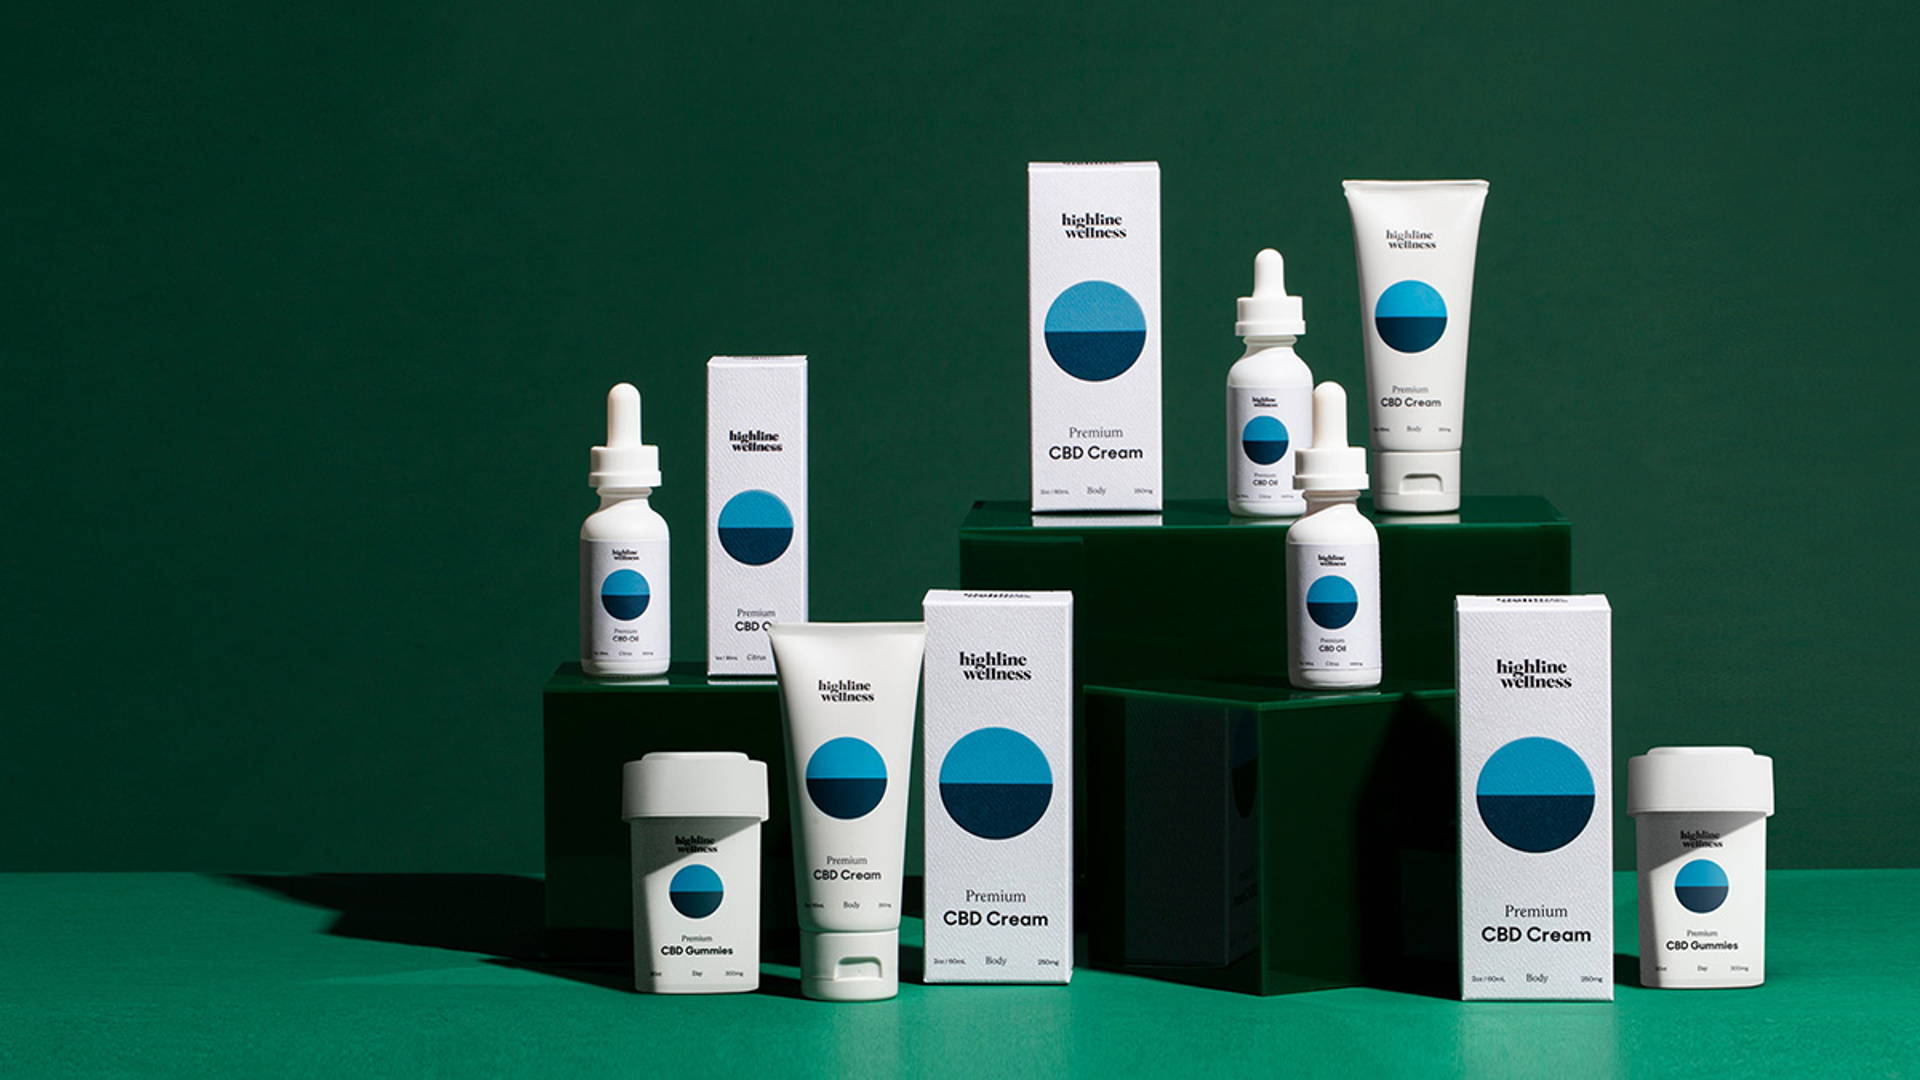 Featured image for Unspoken Agreement Visualizes The Effects Of Highline Wellness’ CBD Products